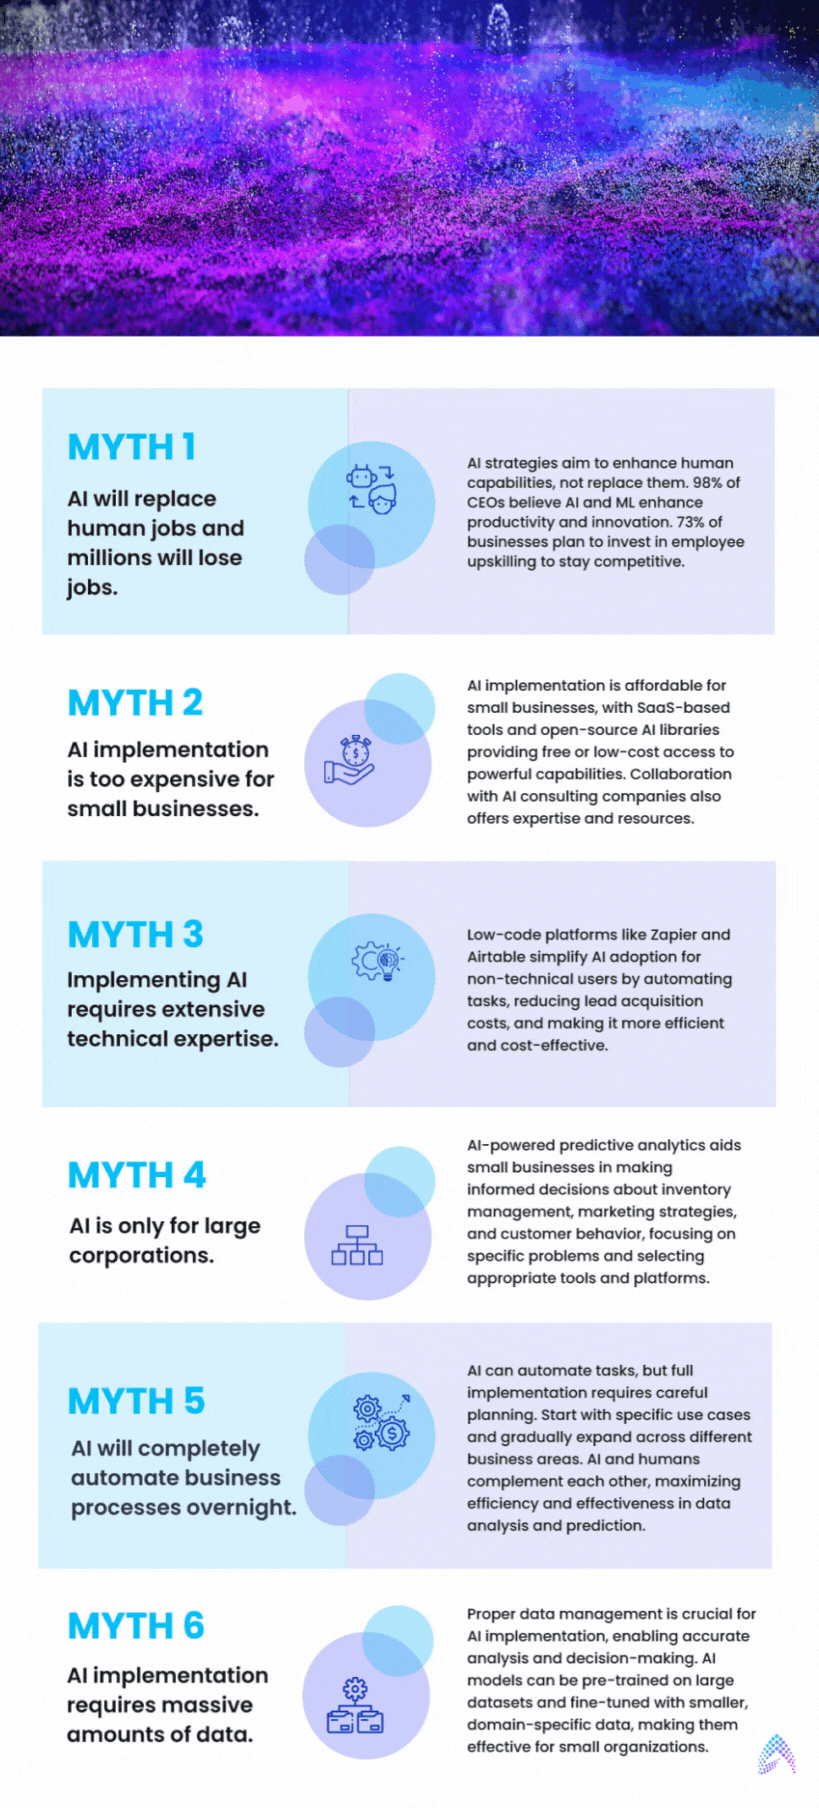 Debunking-6-interesting-myths-and-facts-about-AI-implementation-for-small-businesses